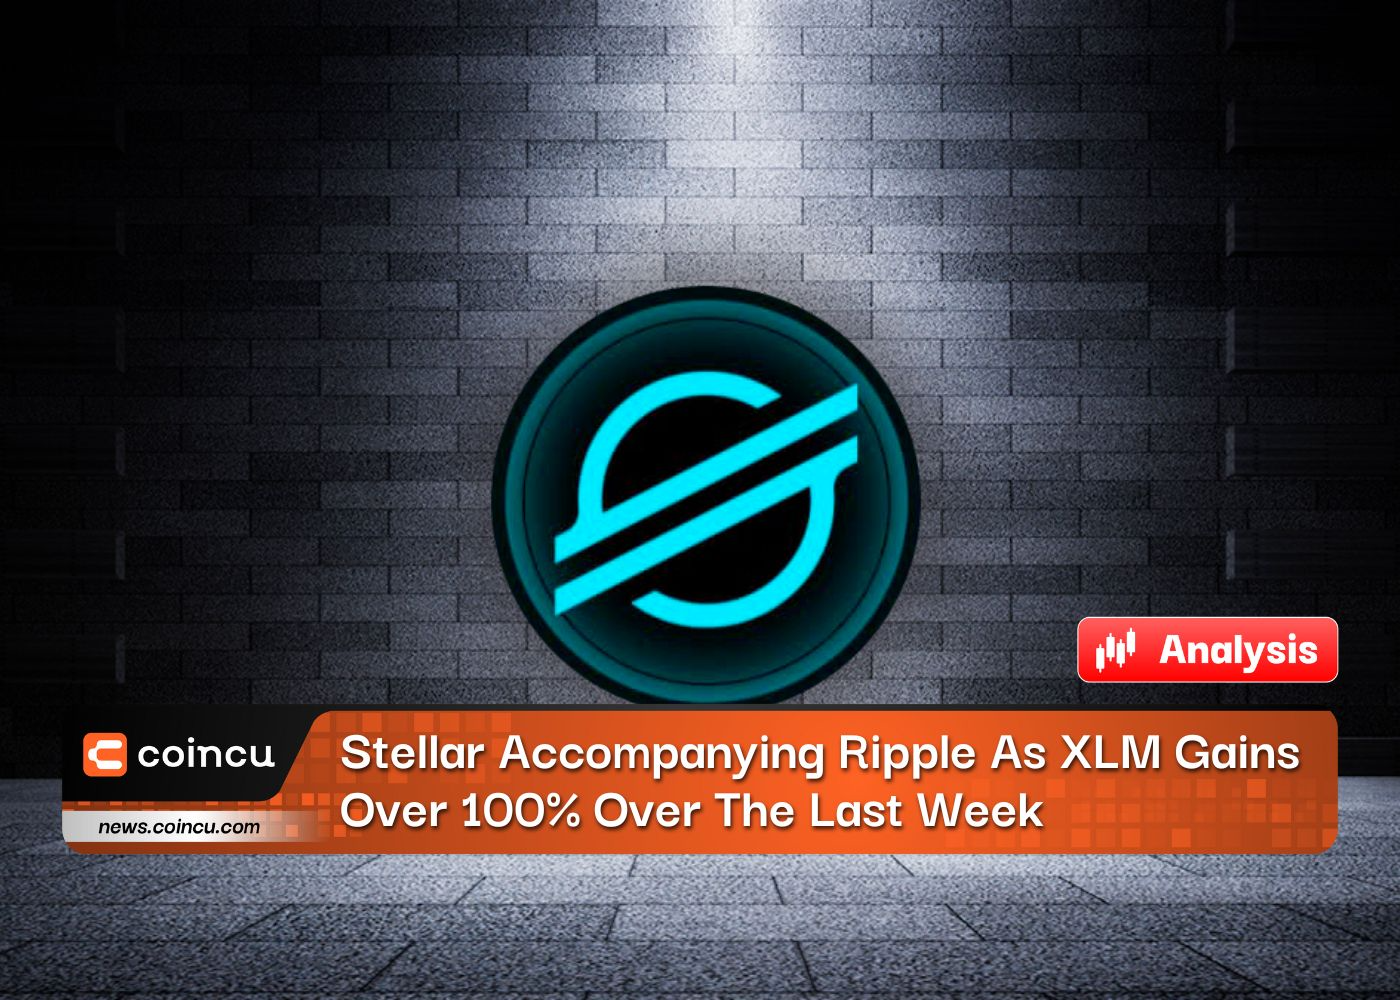 Stellar Accompanying Ripple As XLM Gains Over 100% Over The Last Week